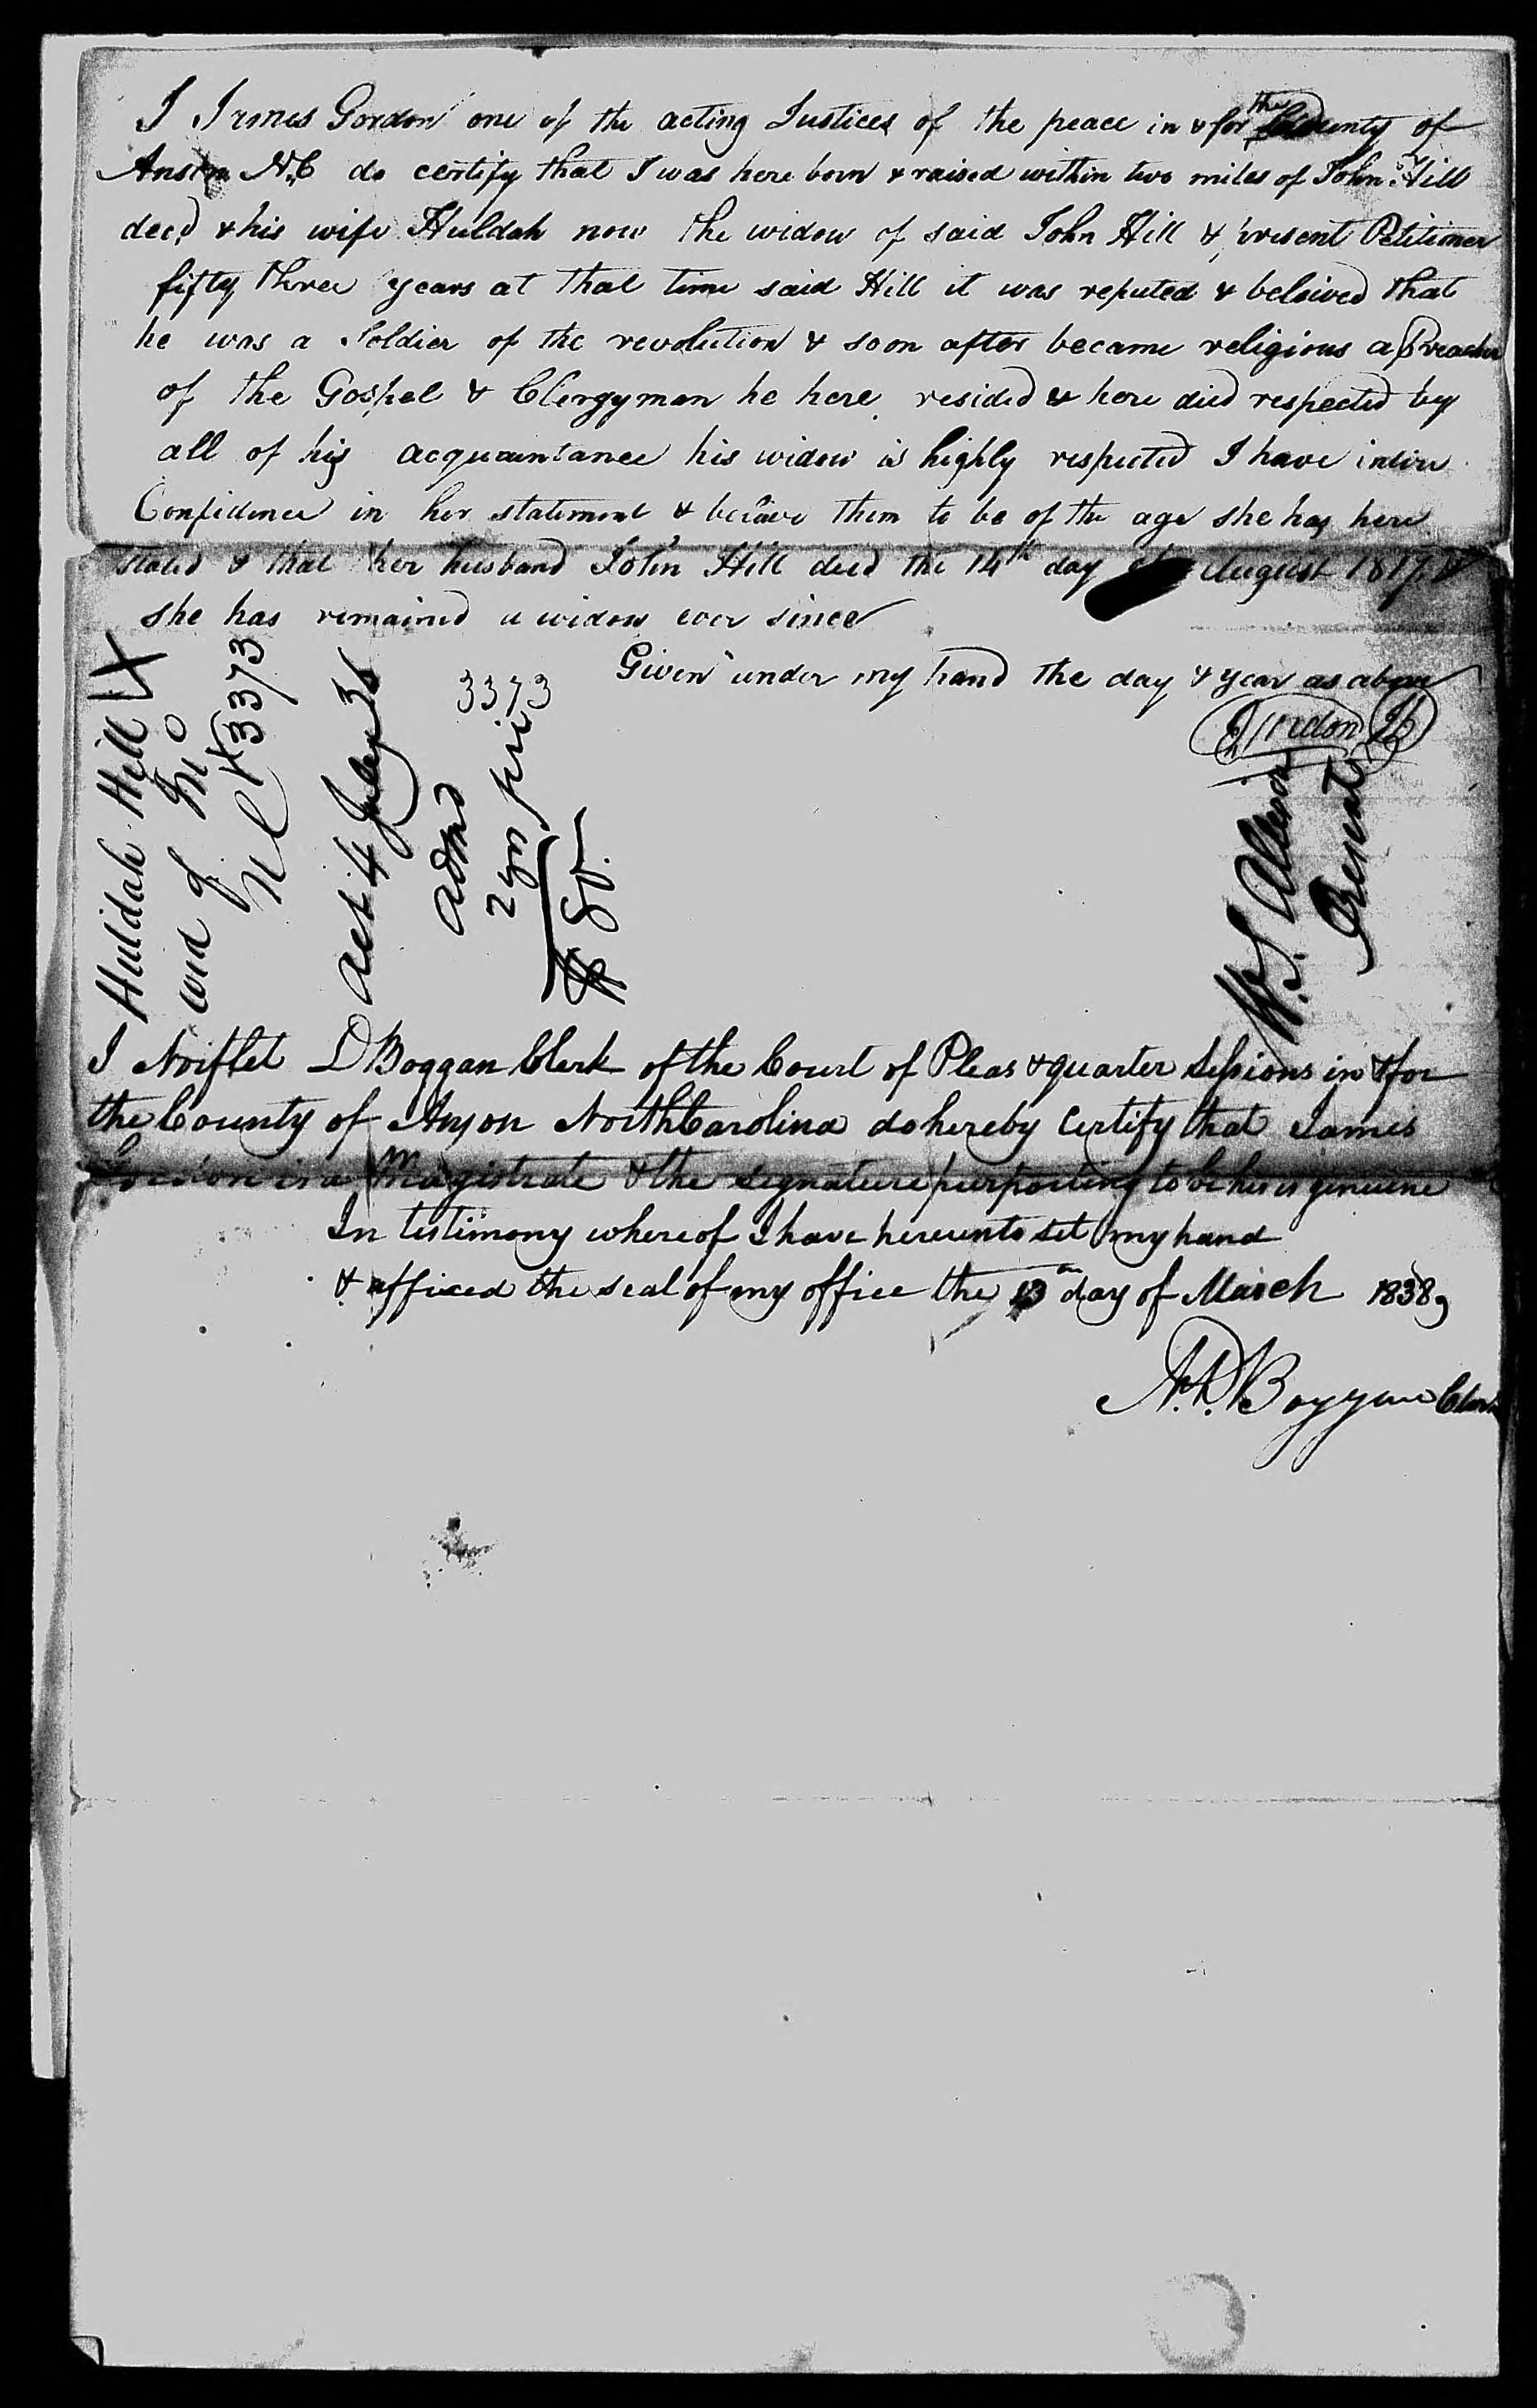 Application for a Widow's Pension from Huldah Hill, 3 February 1838, page 2